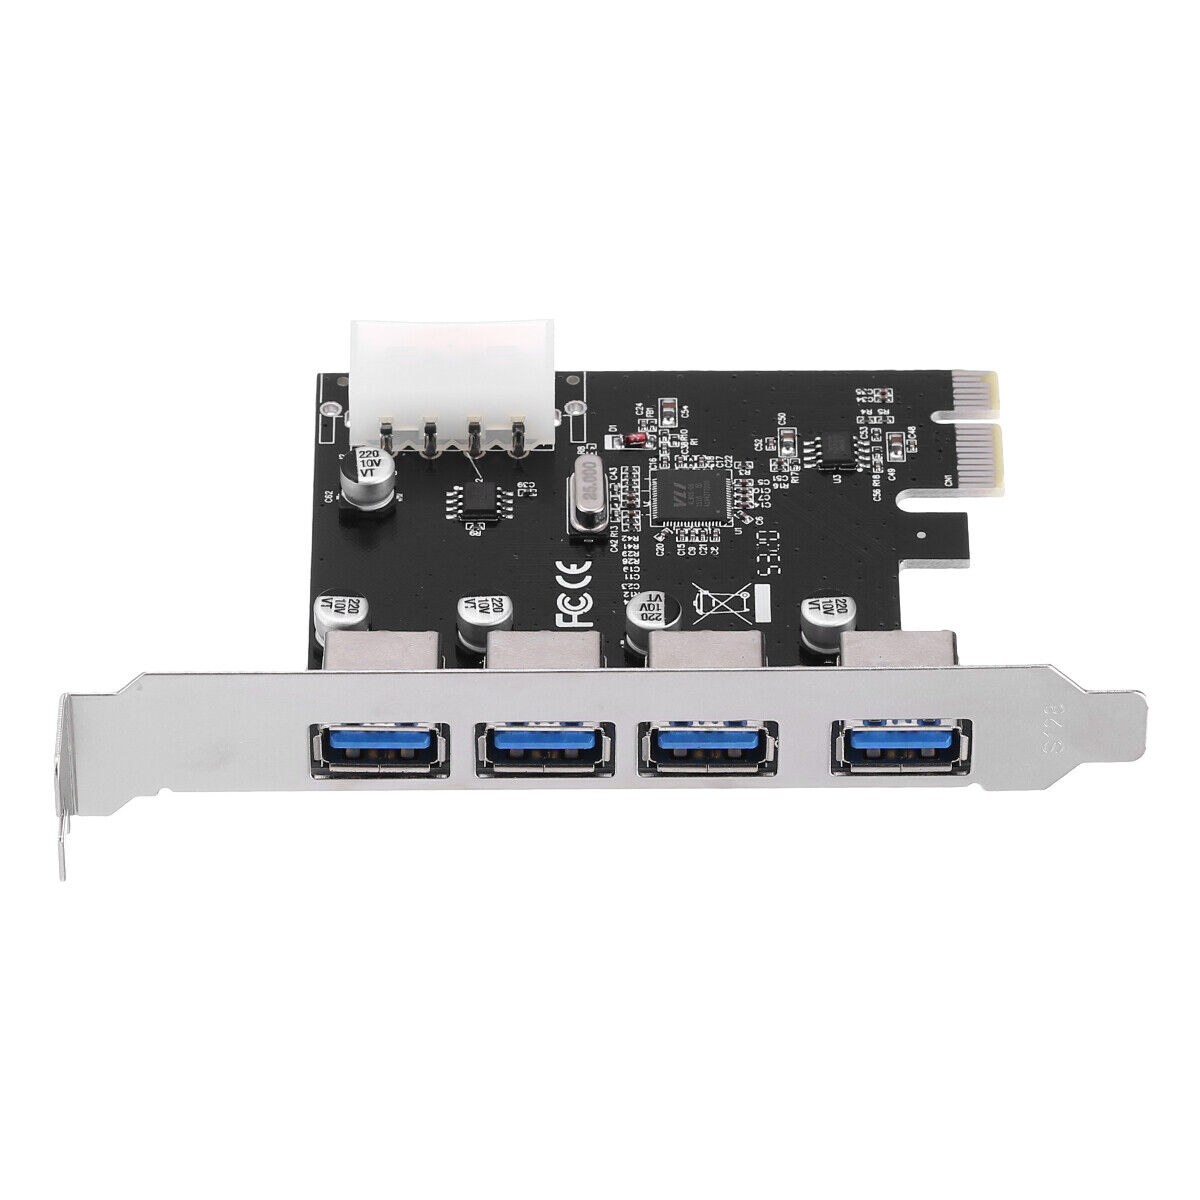 4-Port 5Gbps PCI-E Express to USB 3.0 Controller Expansion Card Adapter for PC Unbranded Does not apply - фотография #11